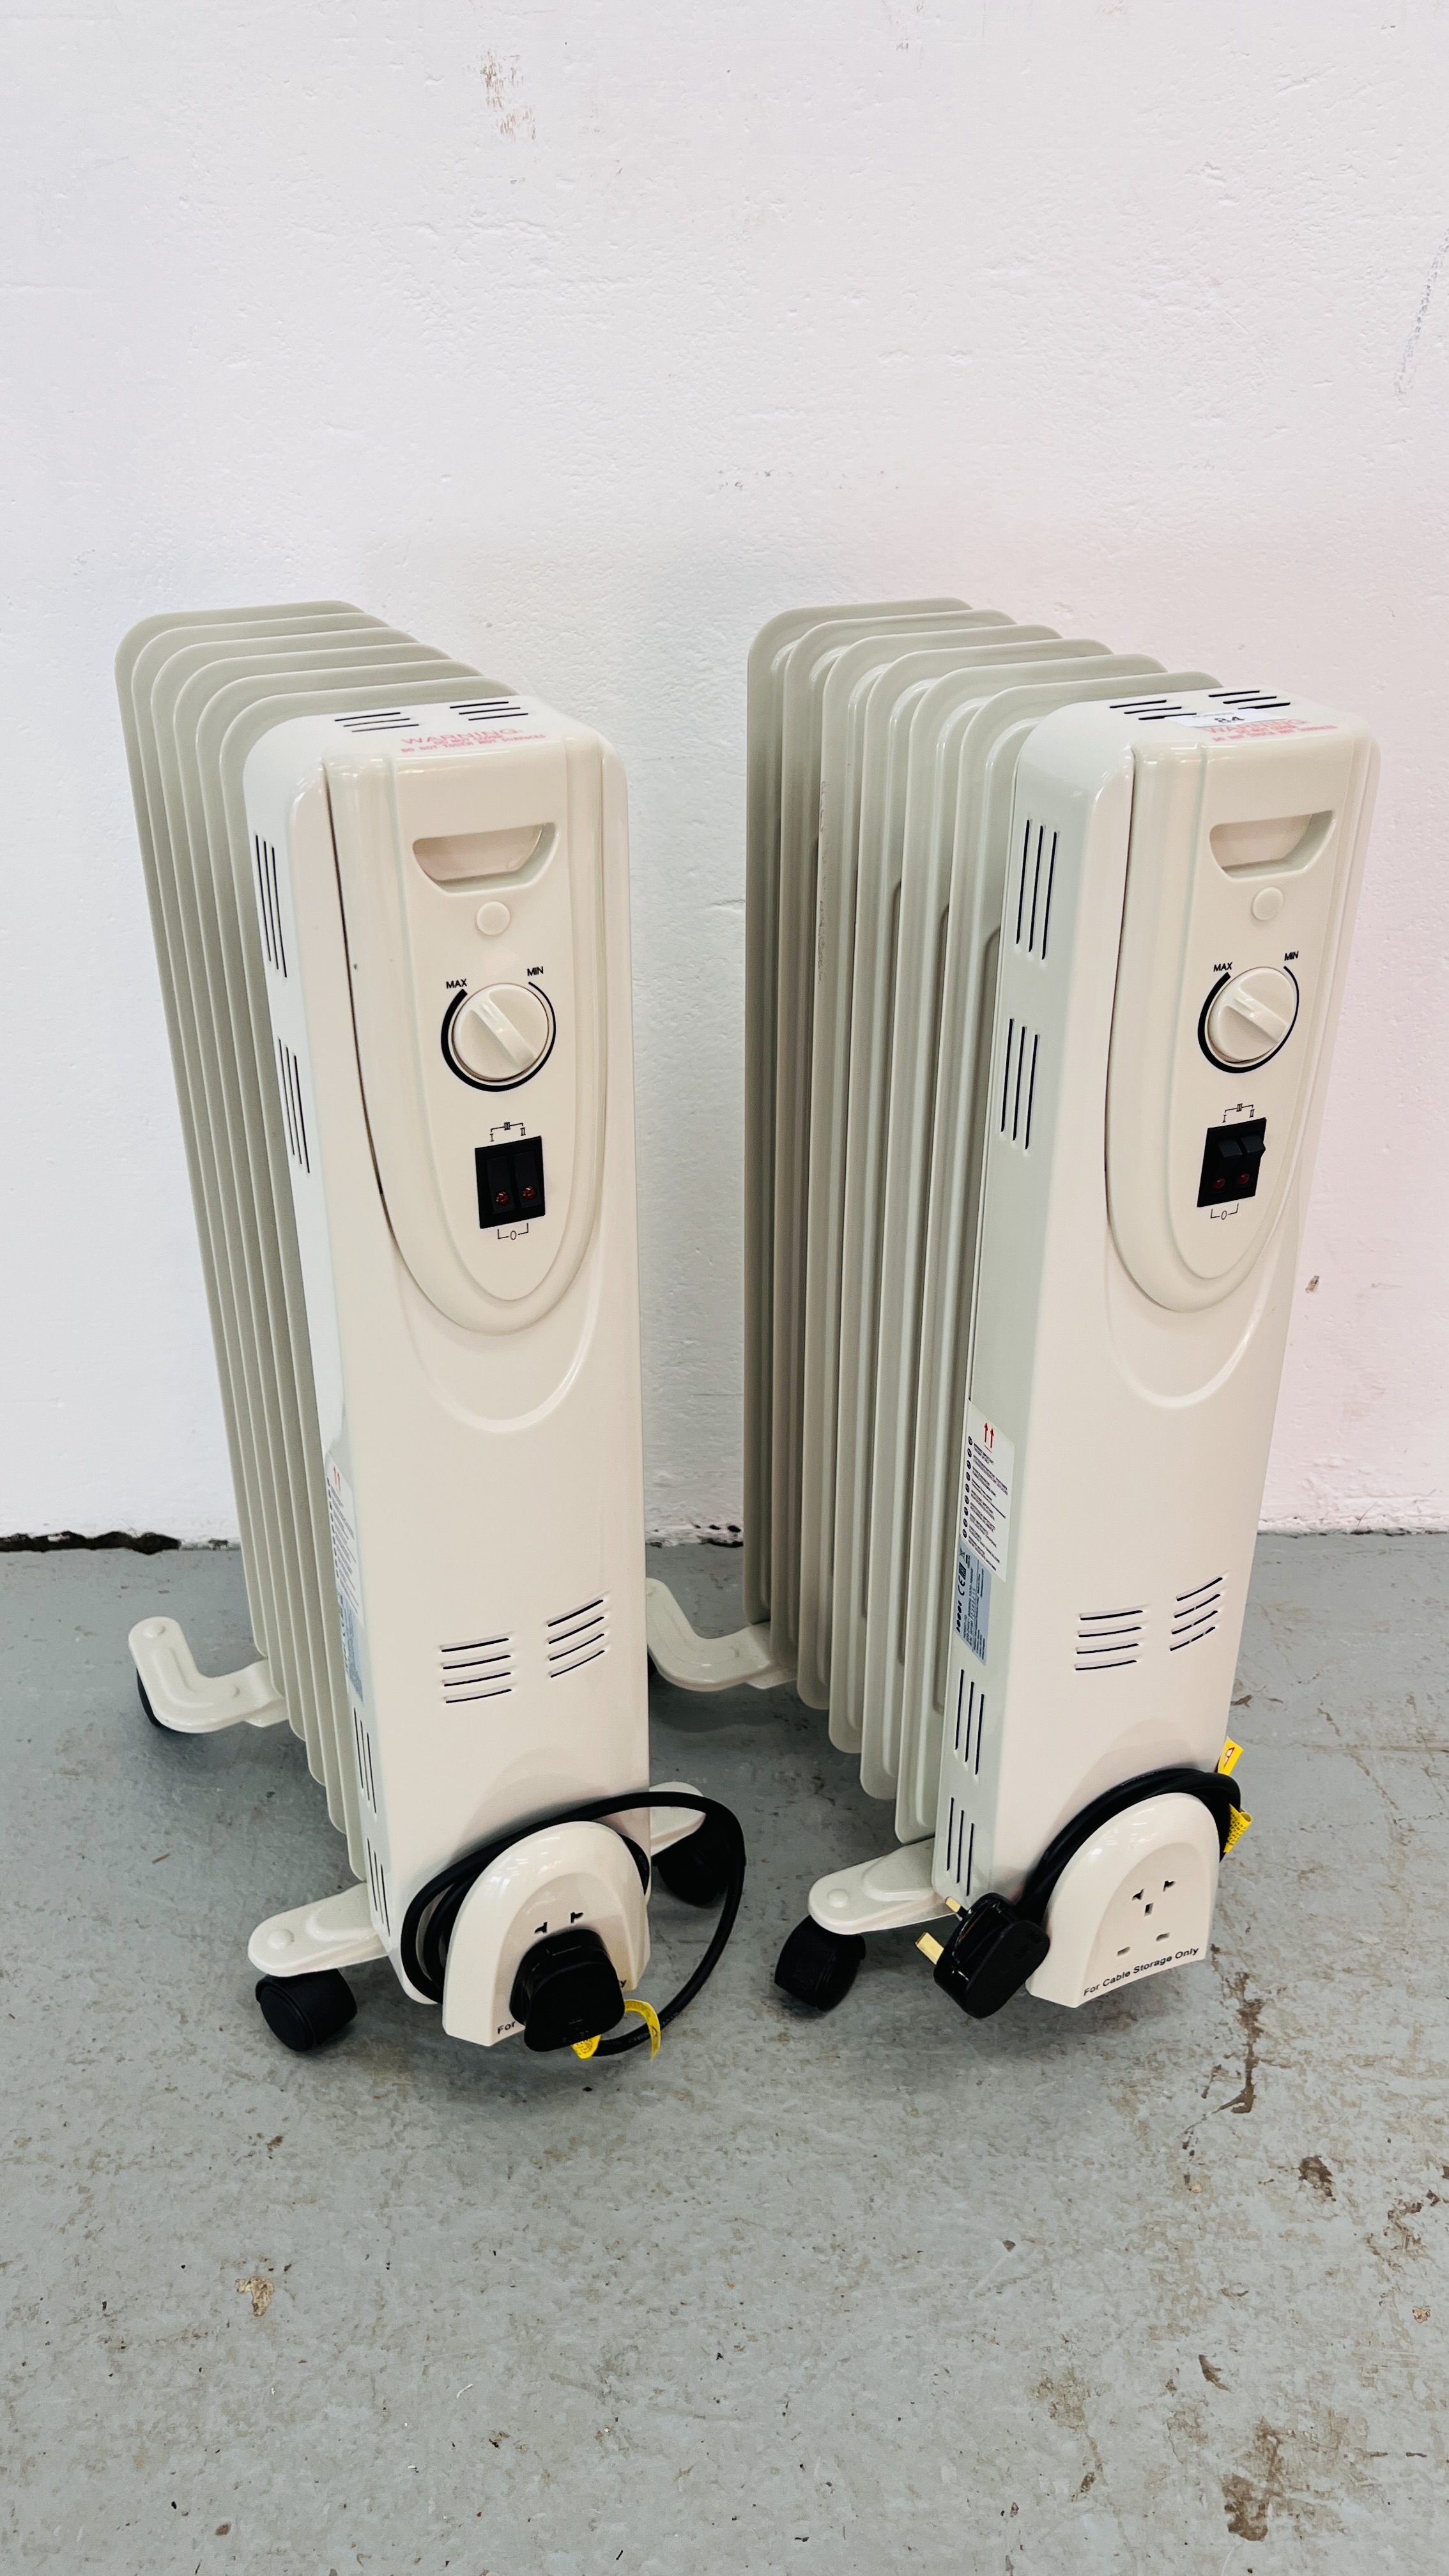 TWO ELECTRIC OIL FILLED RADIATORS - SOLD AS SEEN